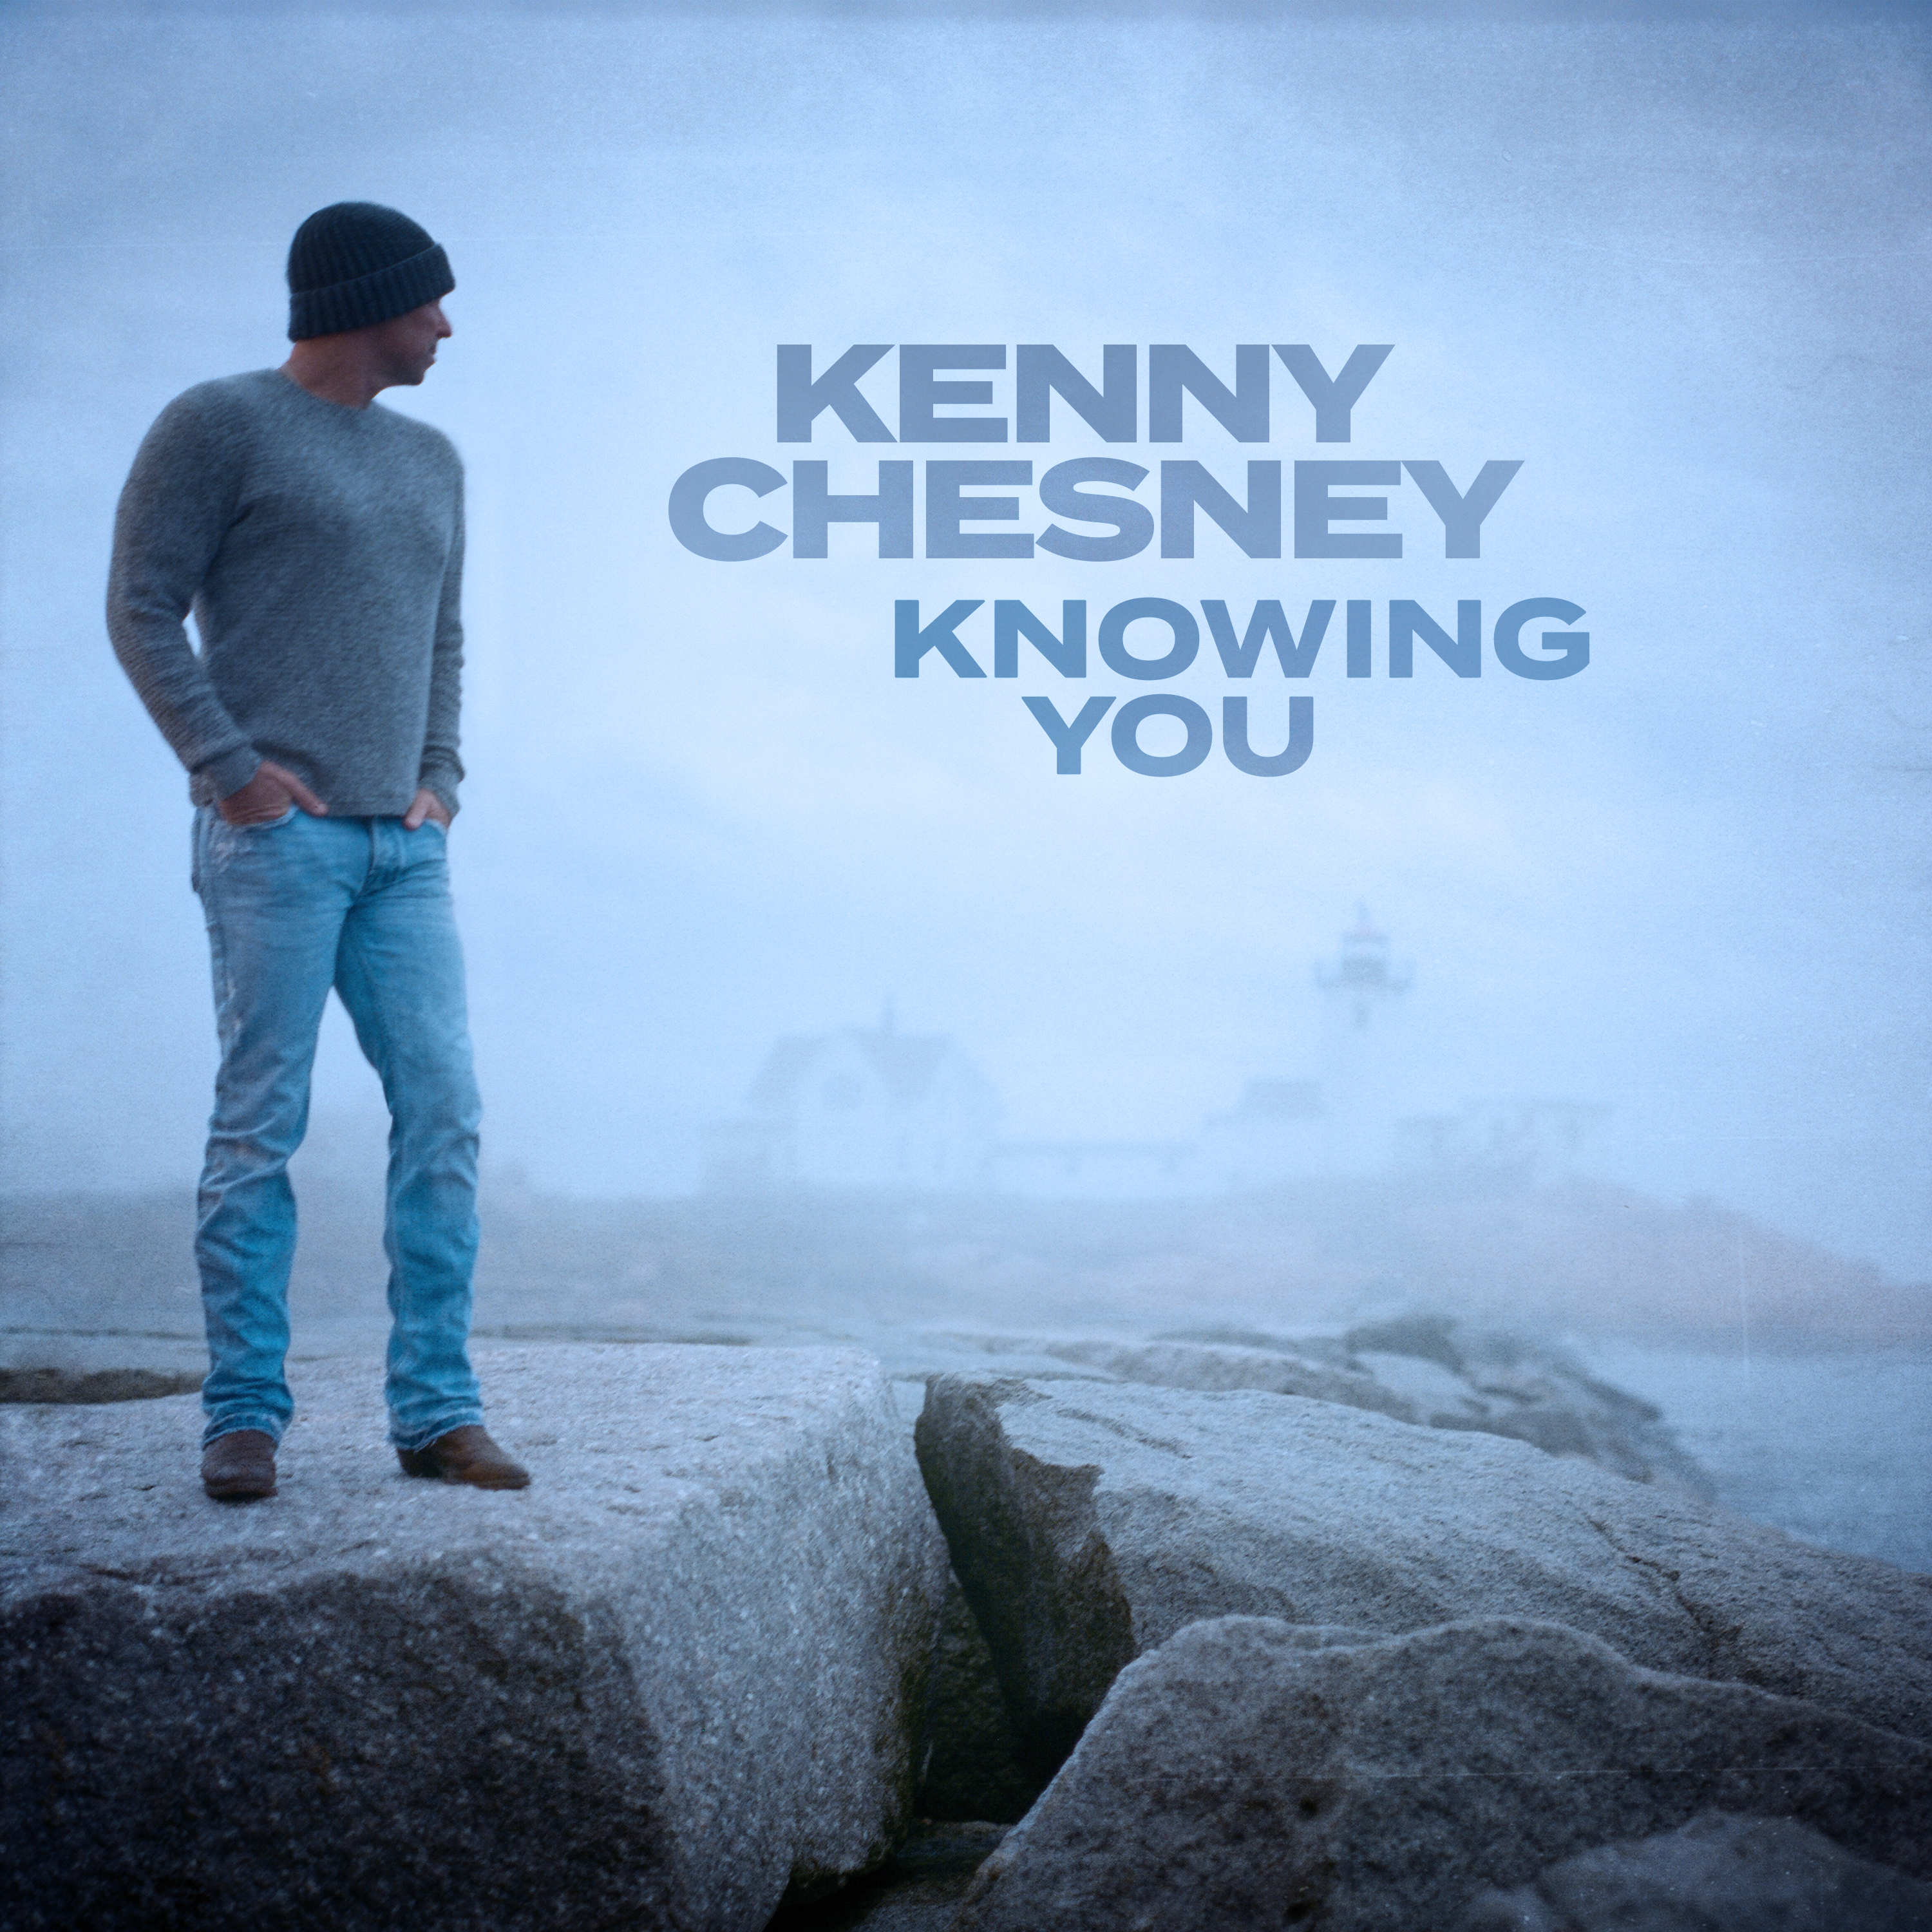 KENNY CHESNEY GIVES RADIO JOY, LOSS + GRATITUDE w "KNOWING YOU"